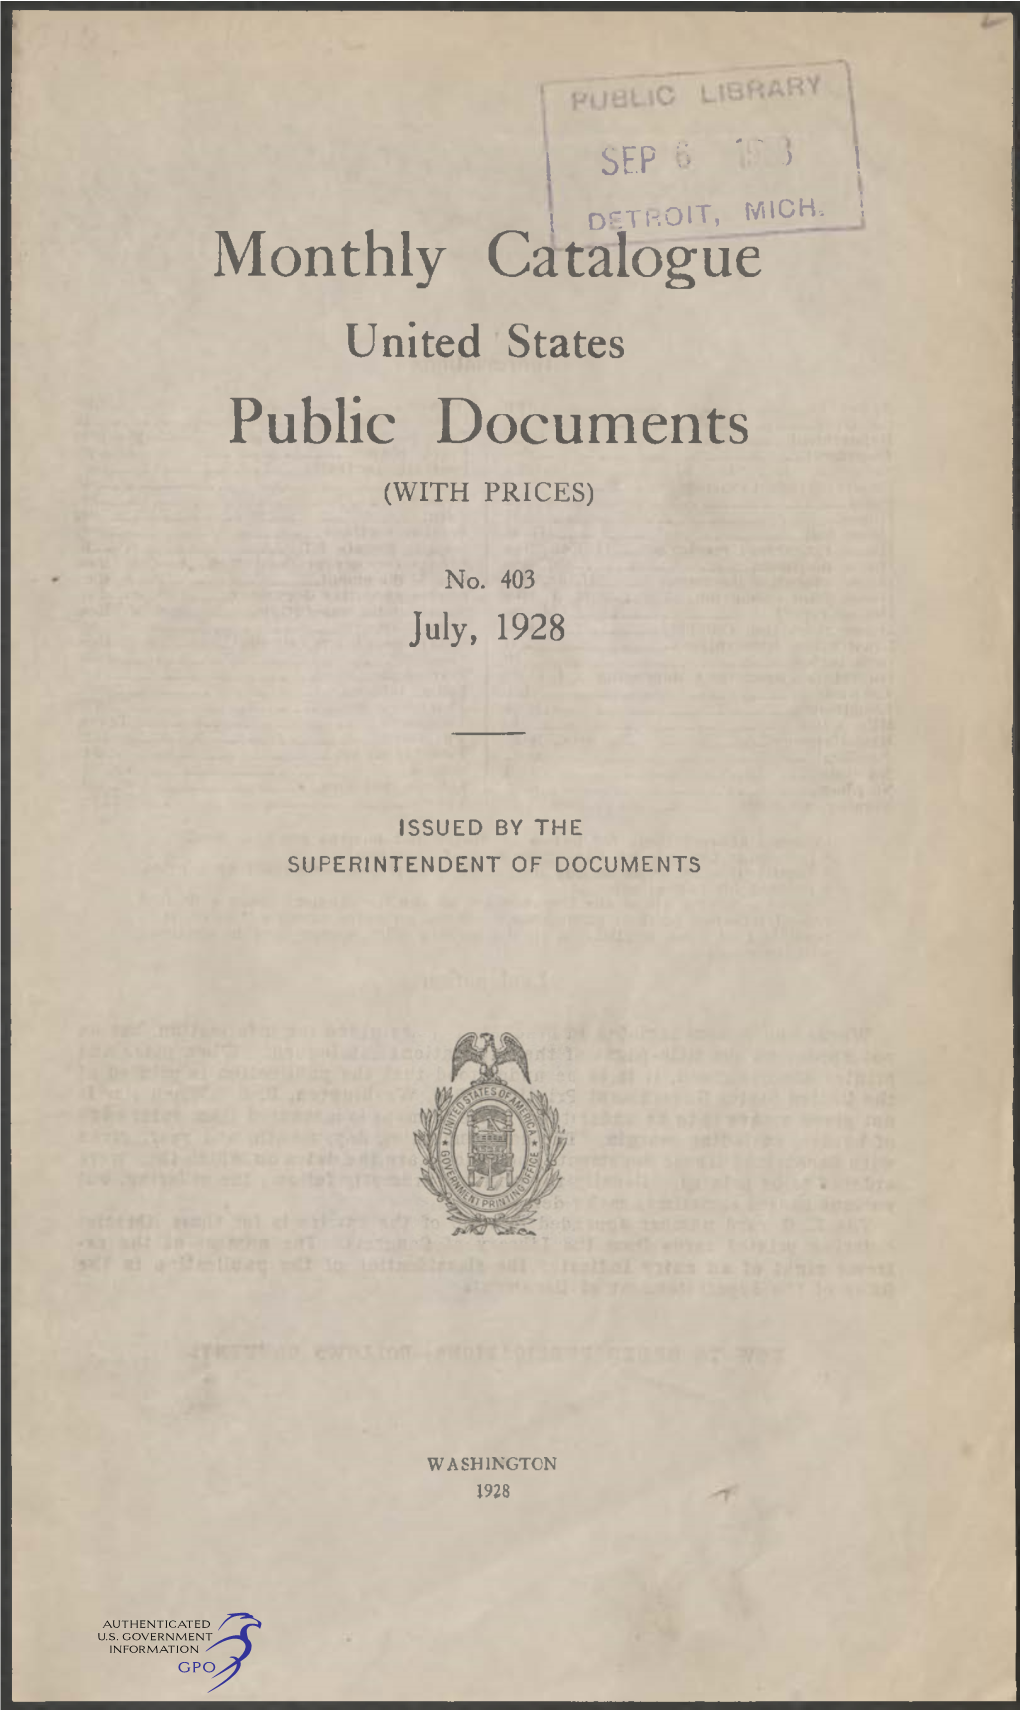 Monthly Catalogue, United States Public Documents, July 1928